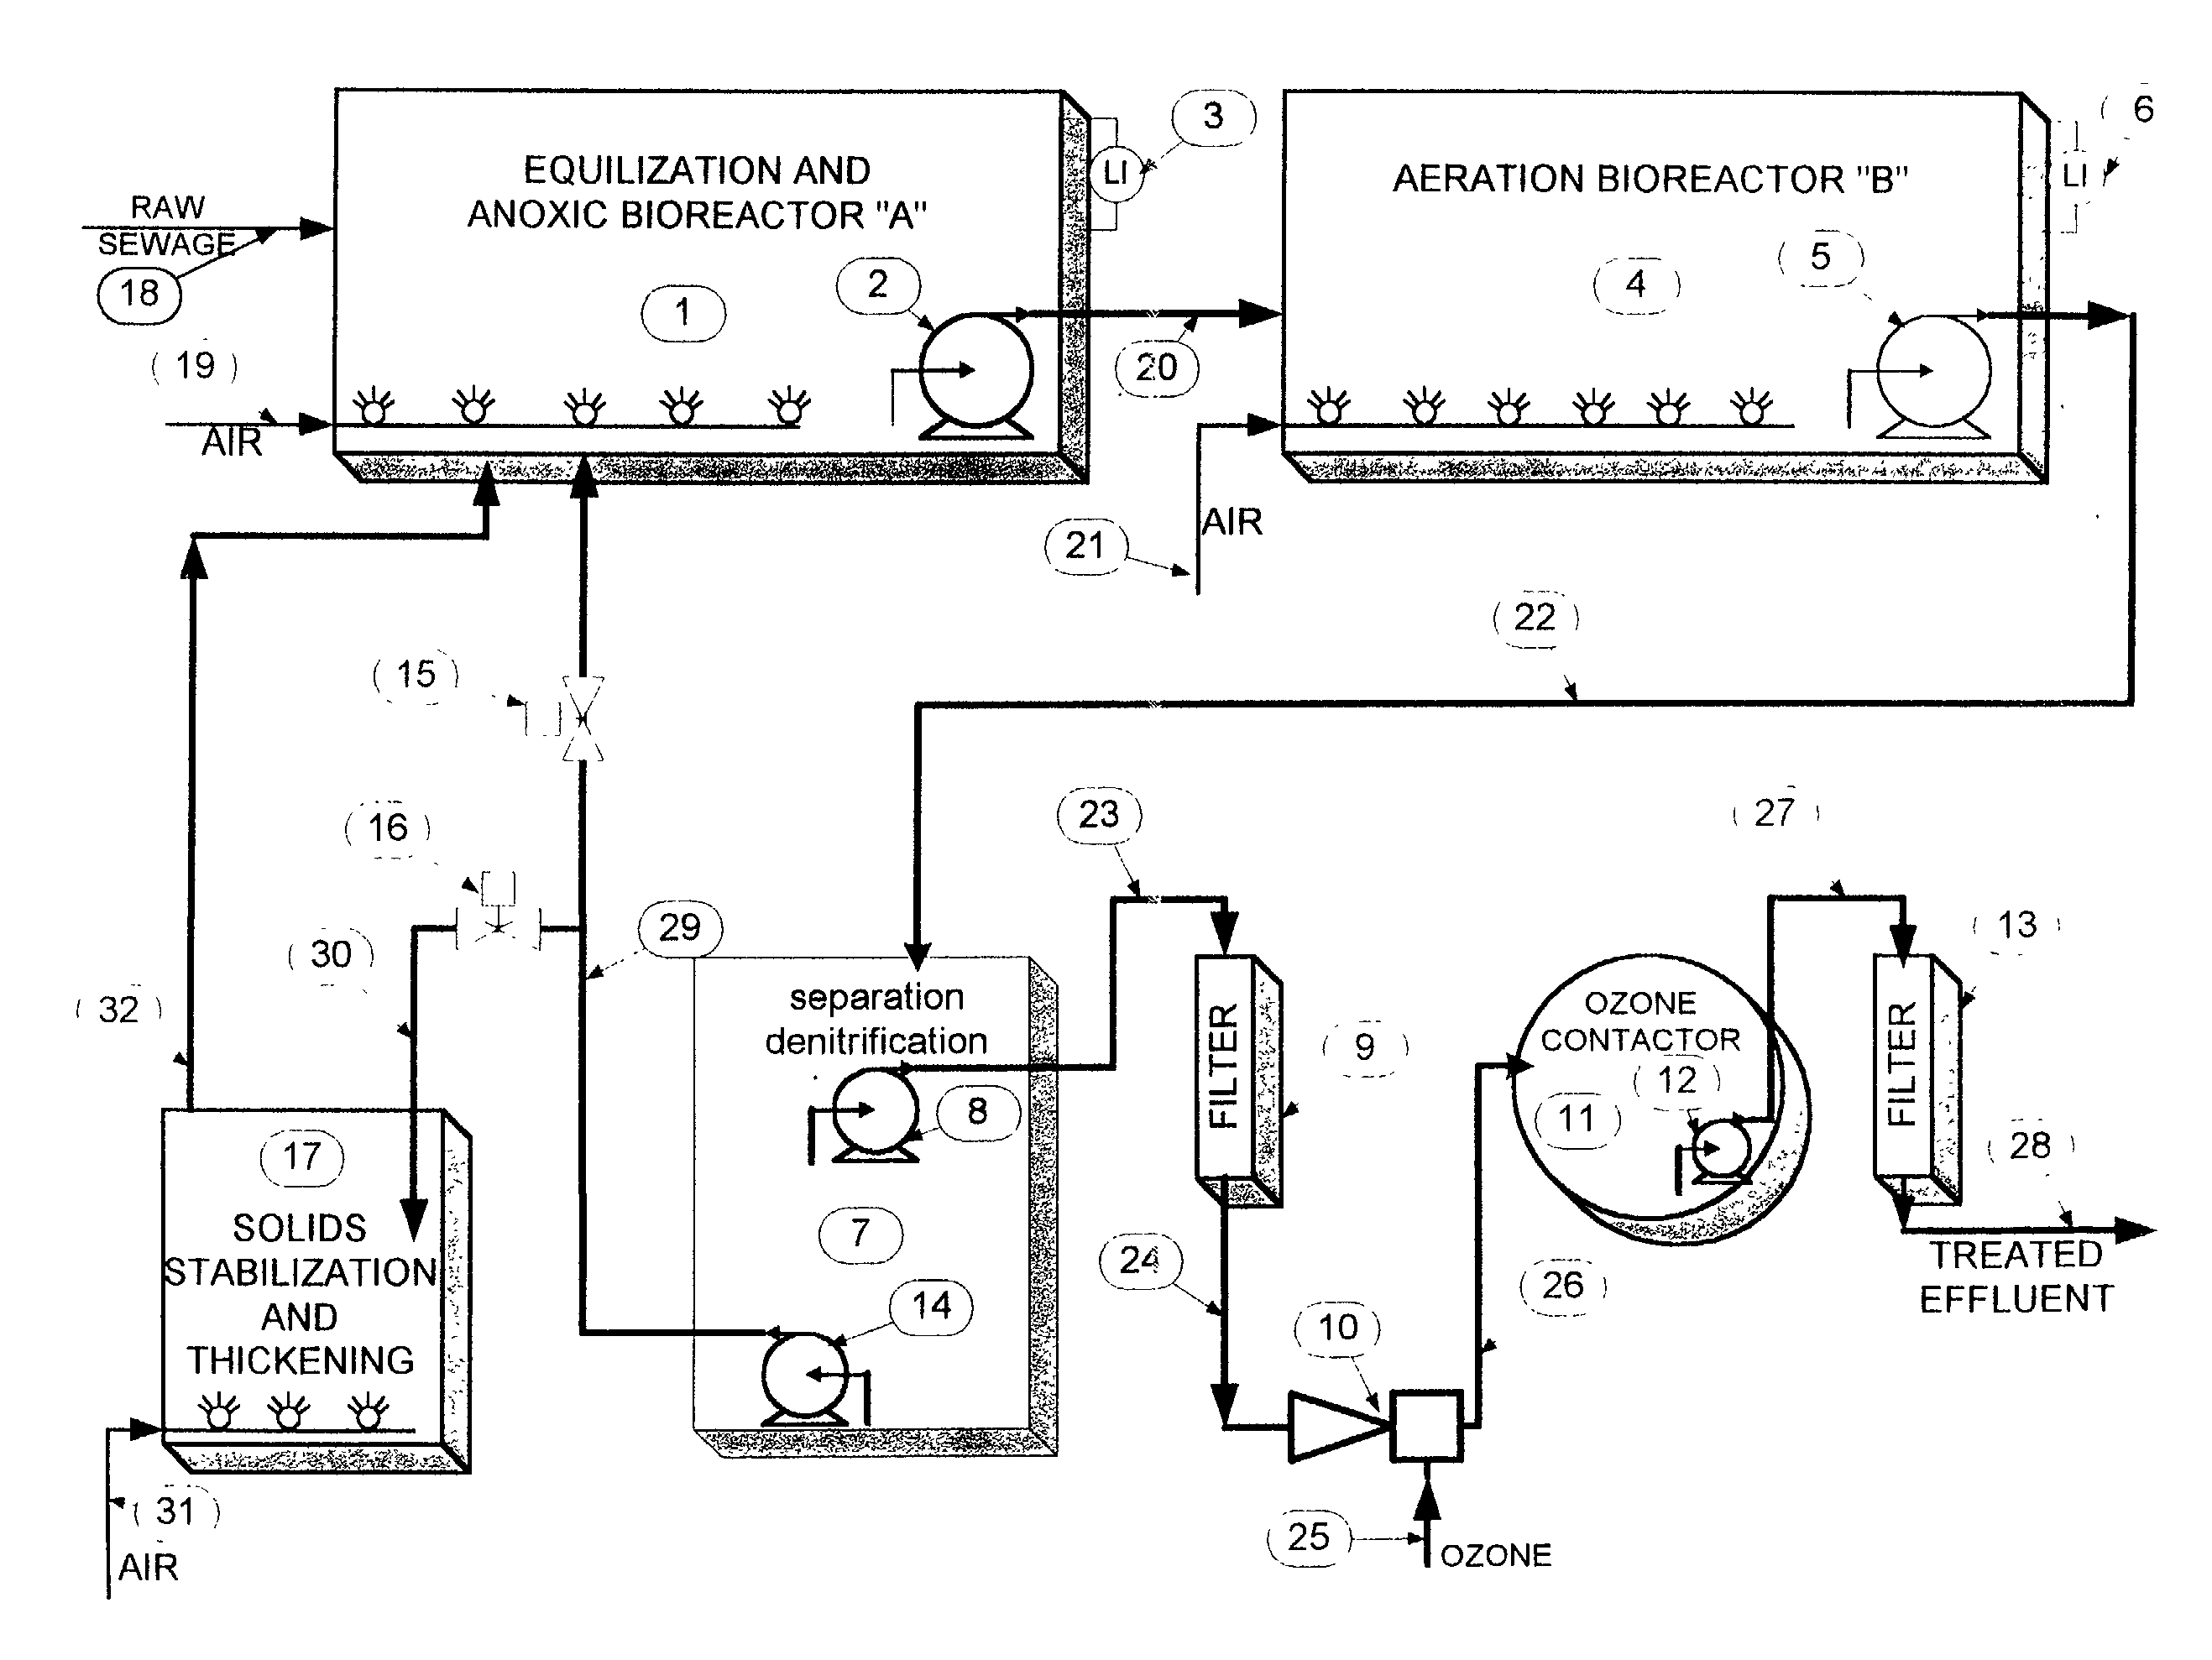 Modified intermittent cycle, extended aeration system (miceas)